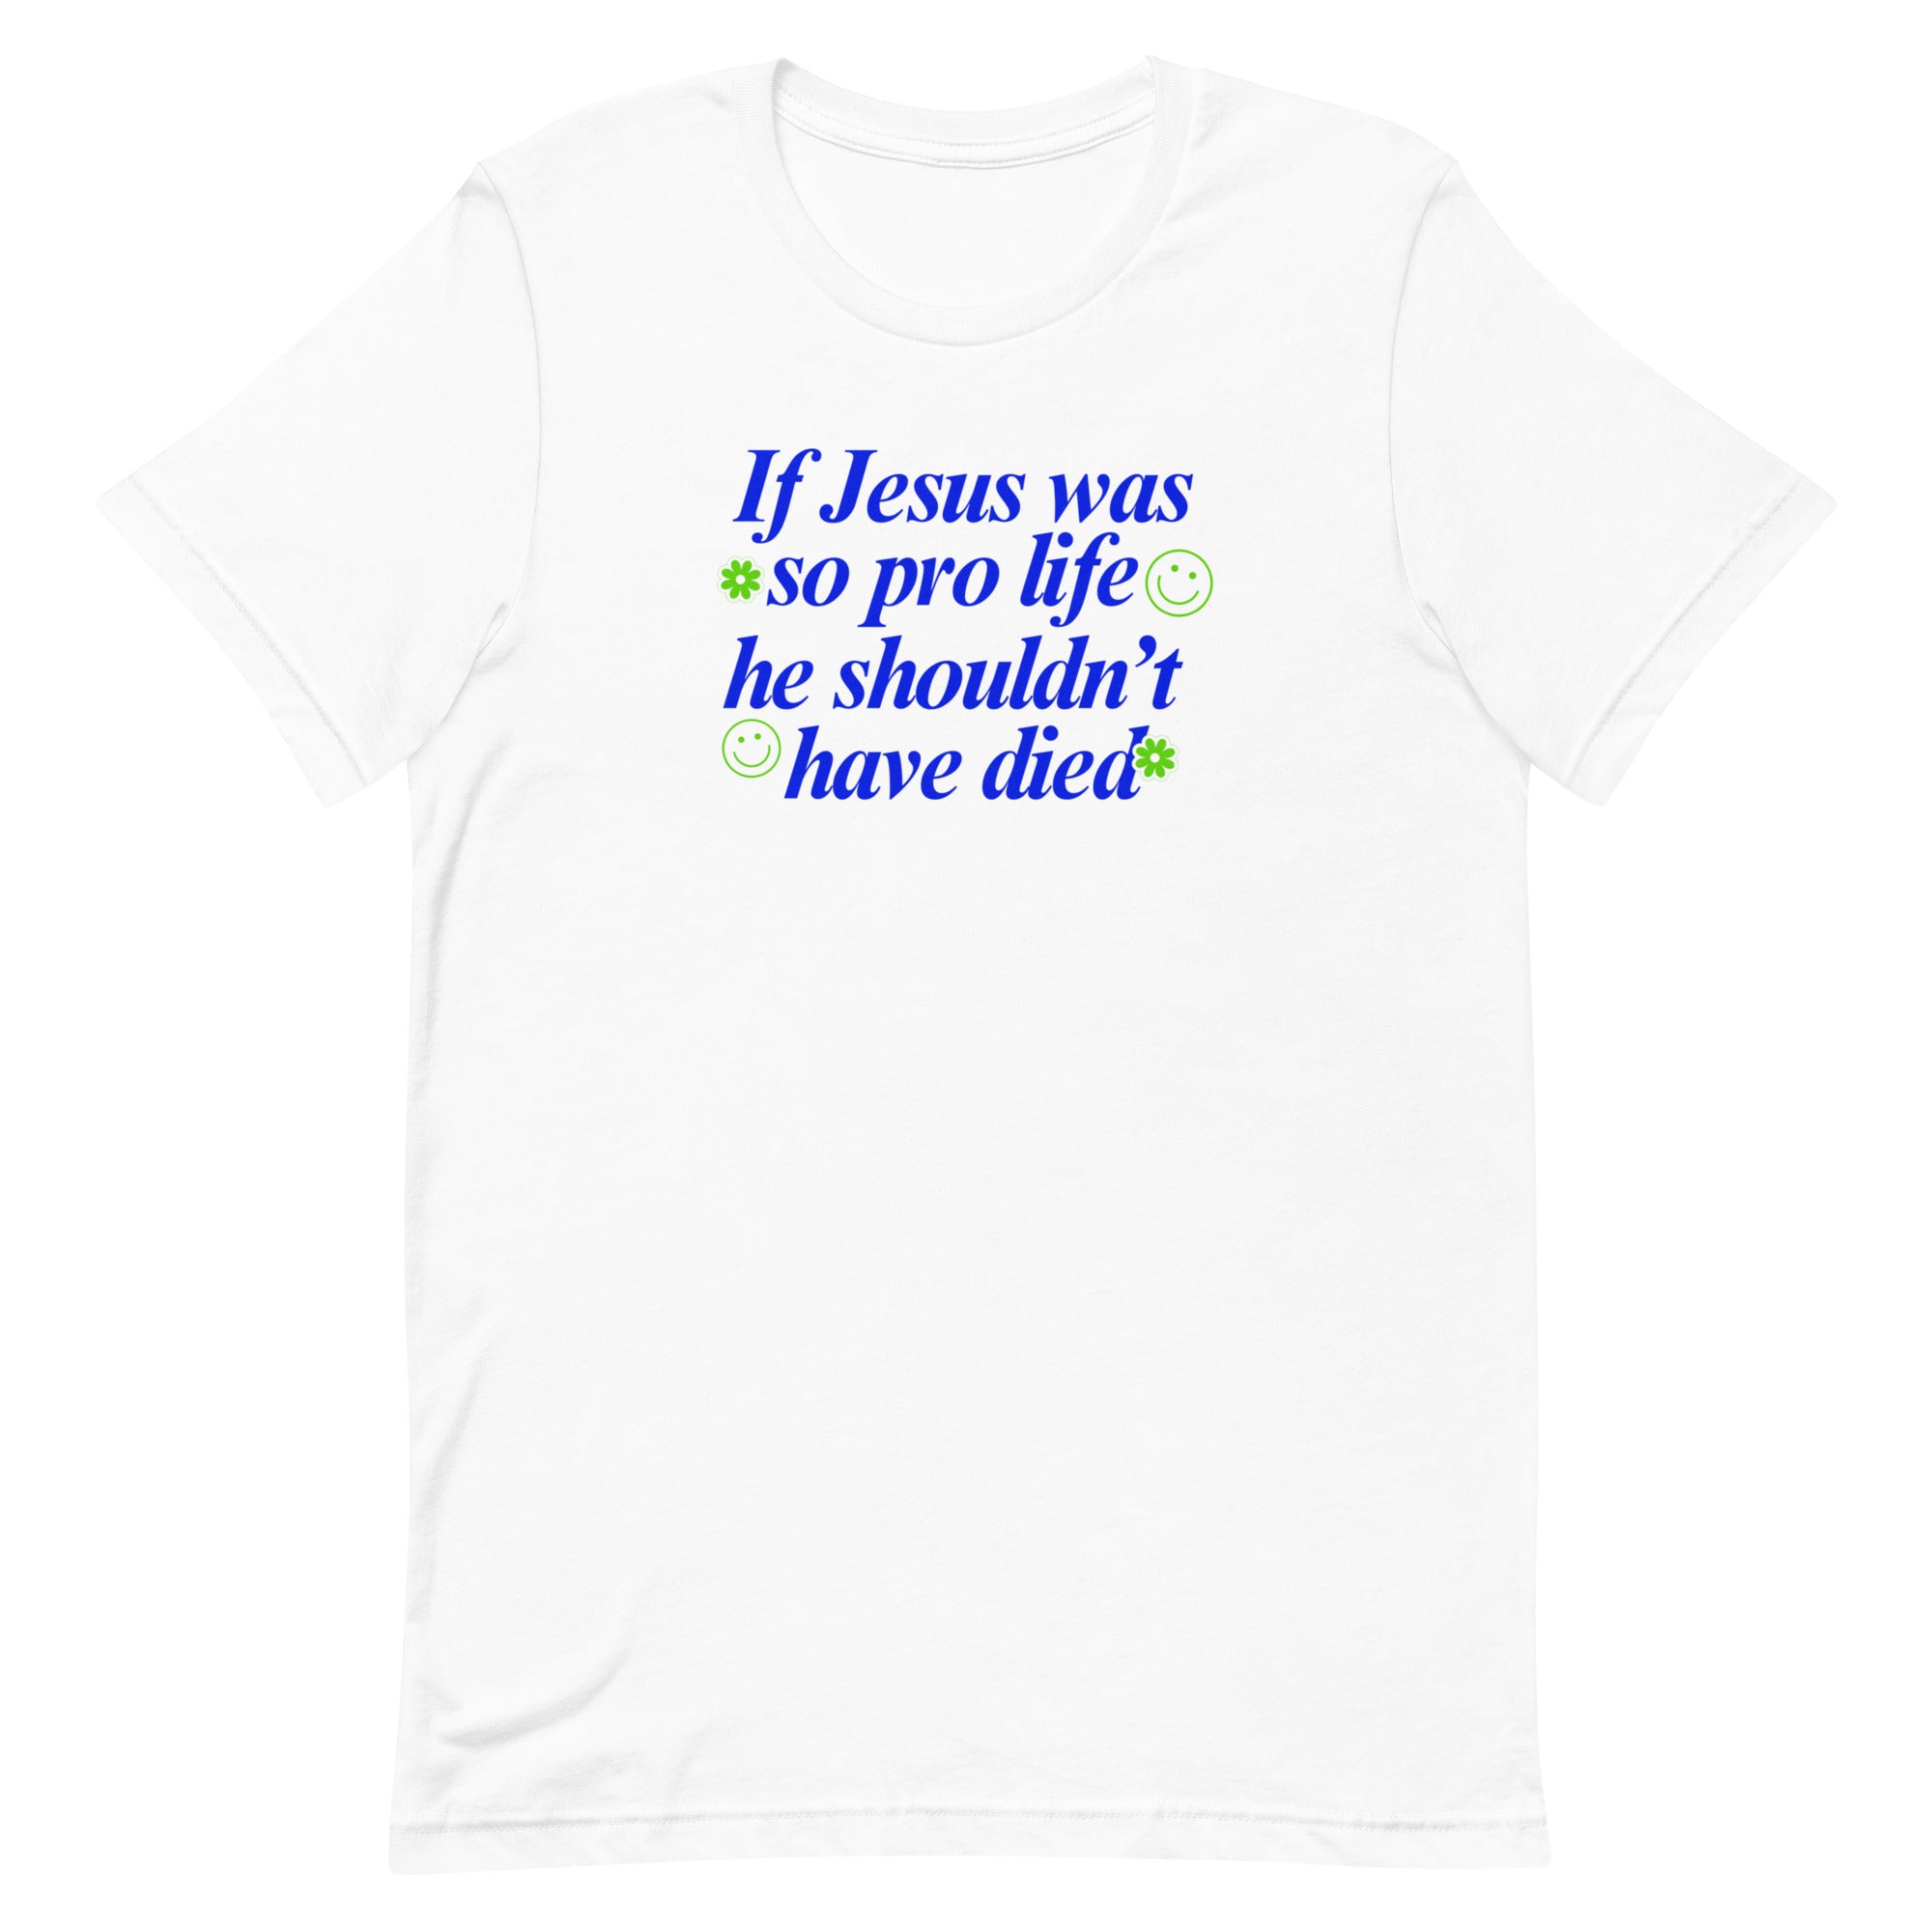 Empowering white feminist t-shirt featuring the phrase 'If Jesus Was So Pro Life She Shouldn’t Have Died,' promoting a message of empowerment and advocating for women’s rights.